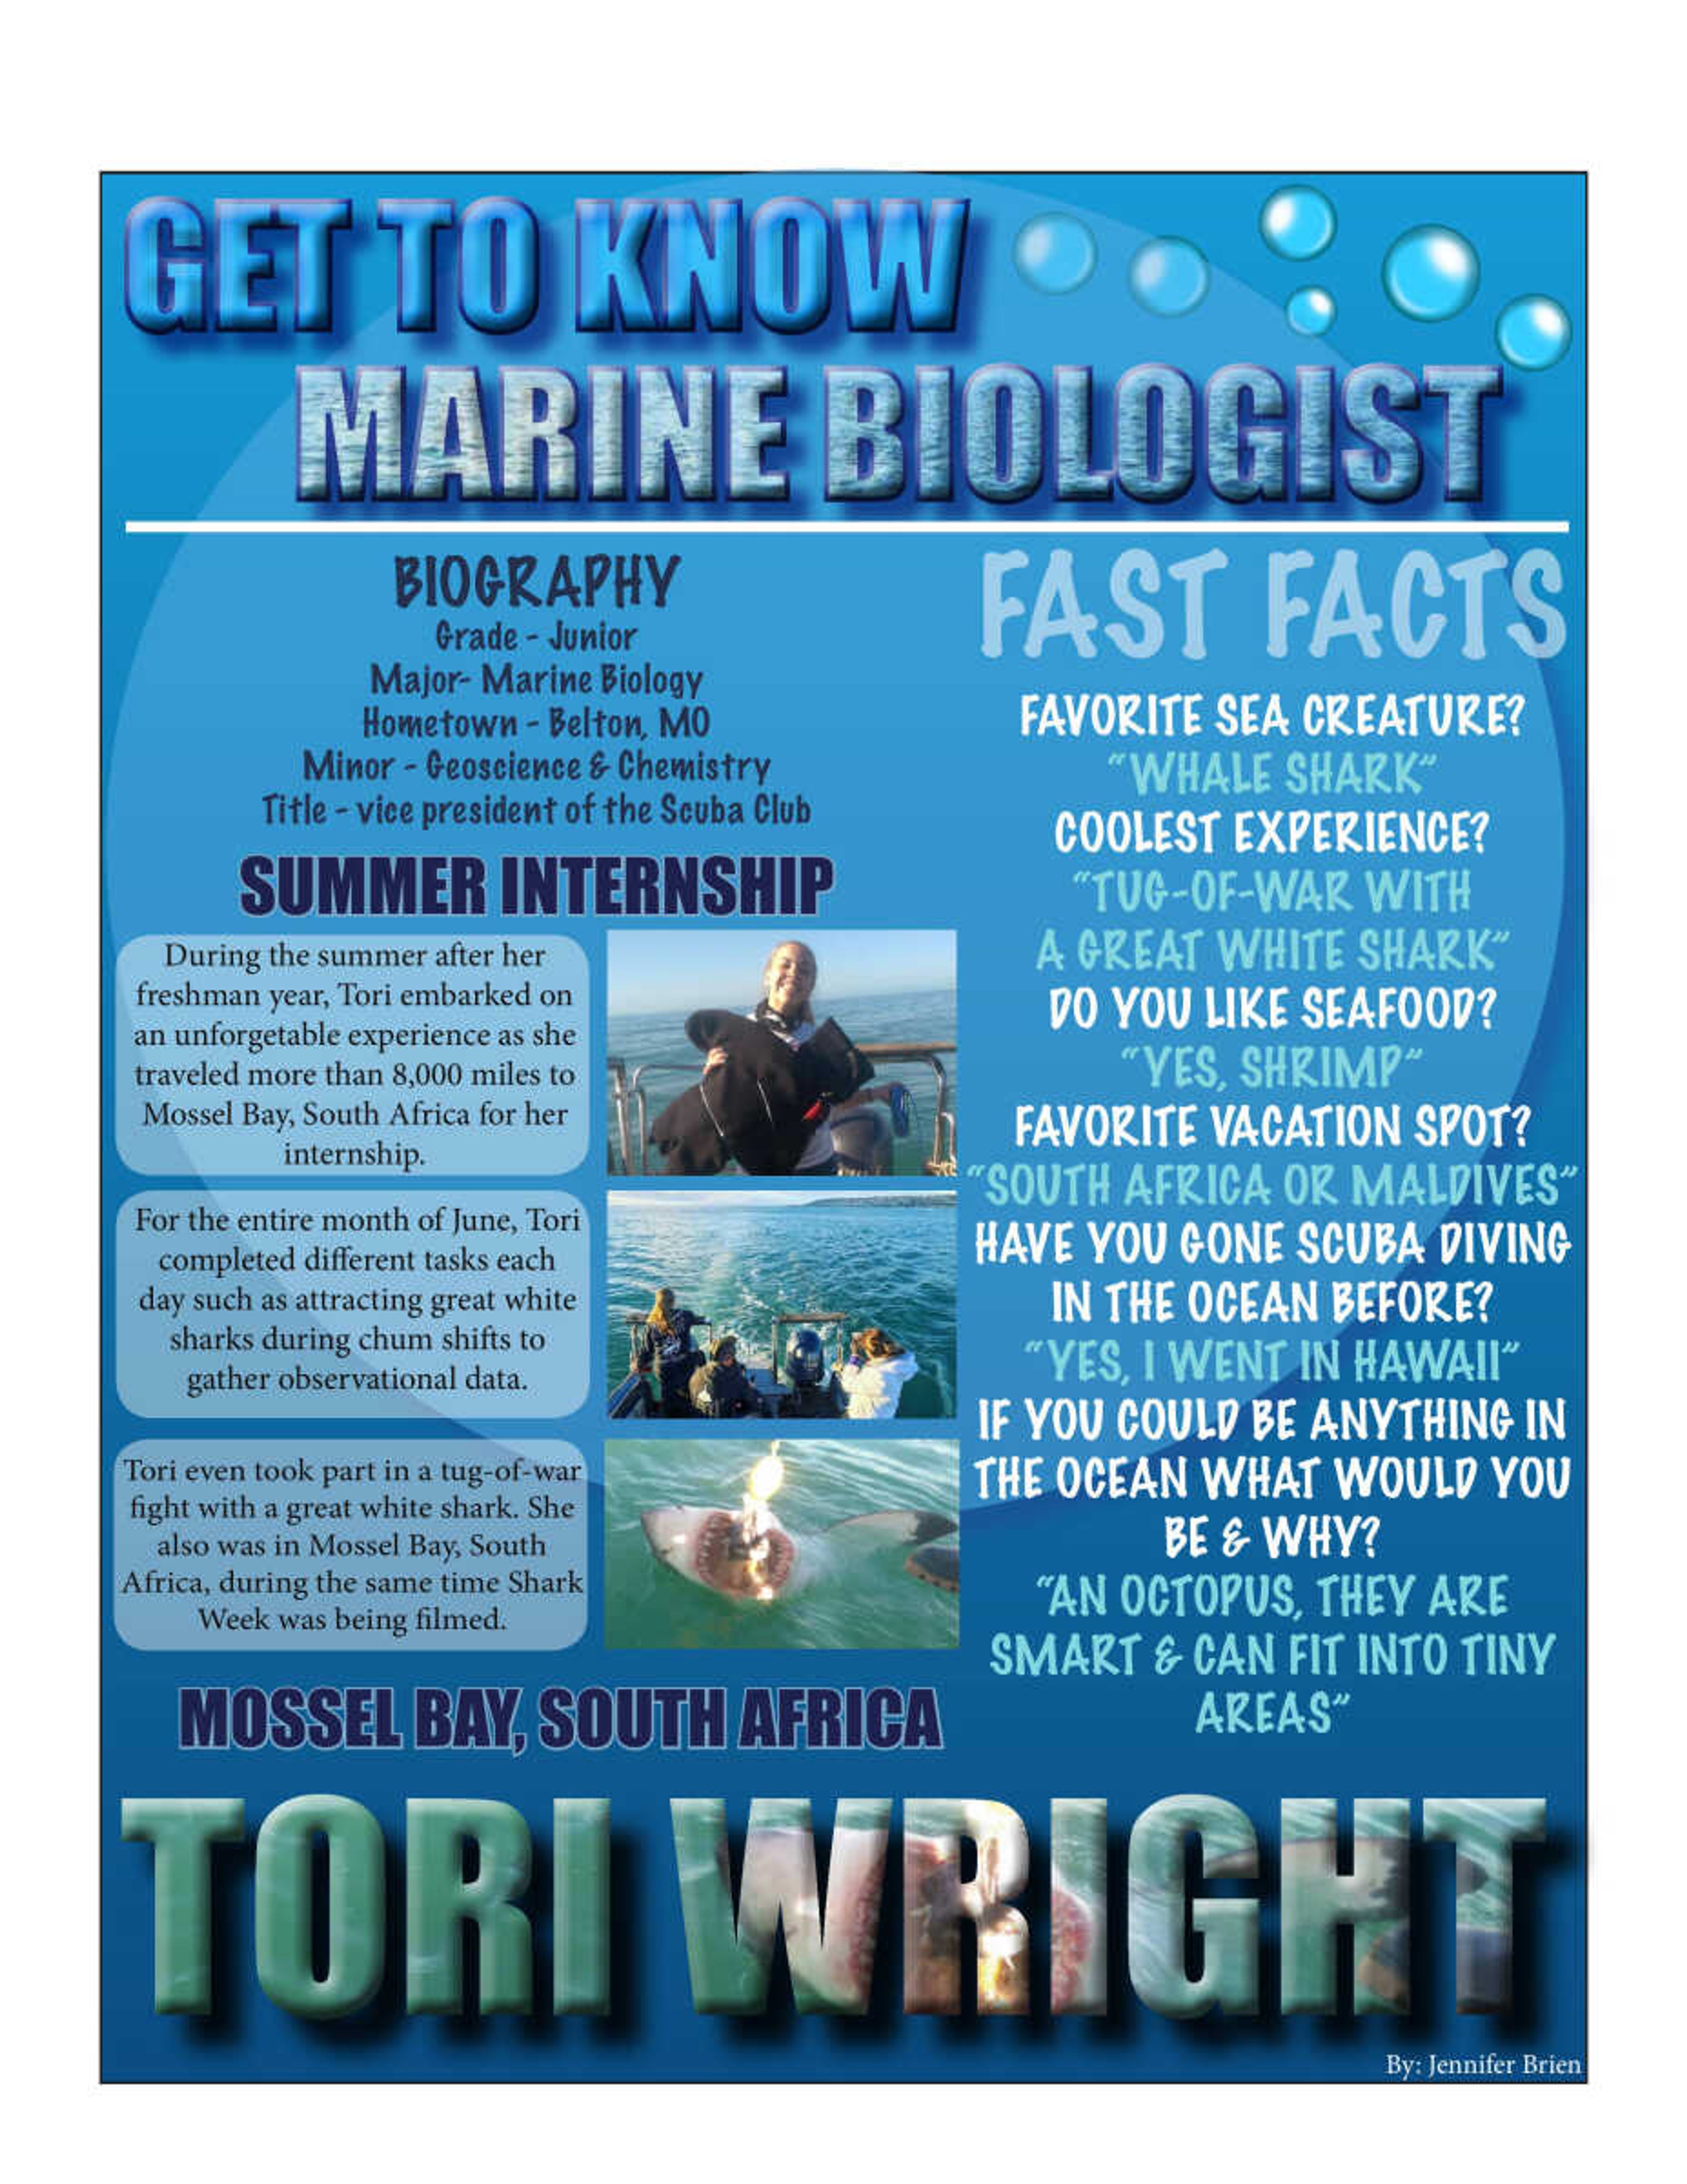 Breaking the waters, Marine Biologist Tori Wright goes with the current